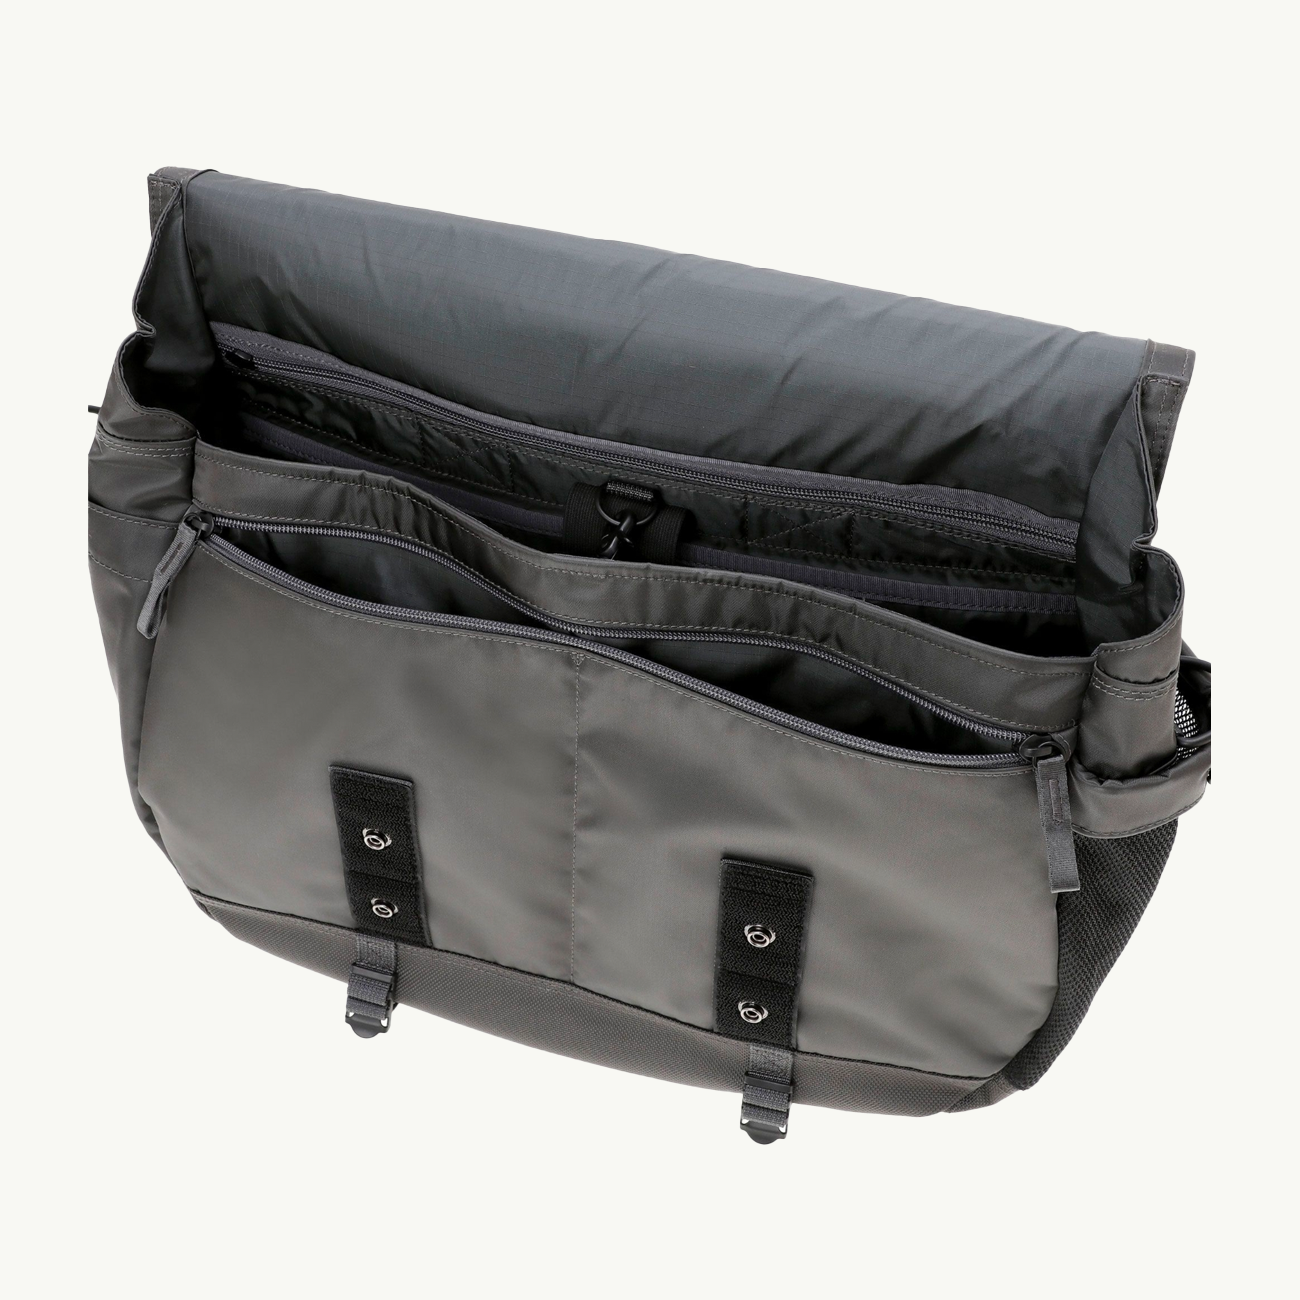 POTR/Ride Messenger Bag With Bicycle Chain - Graphite